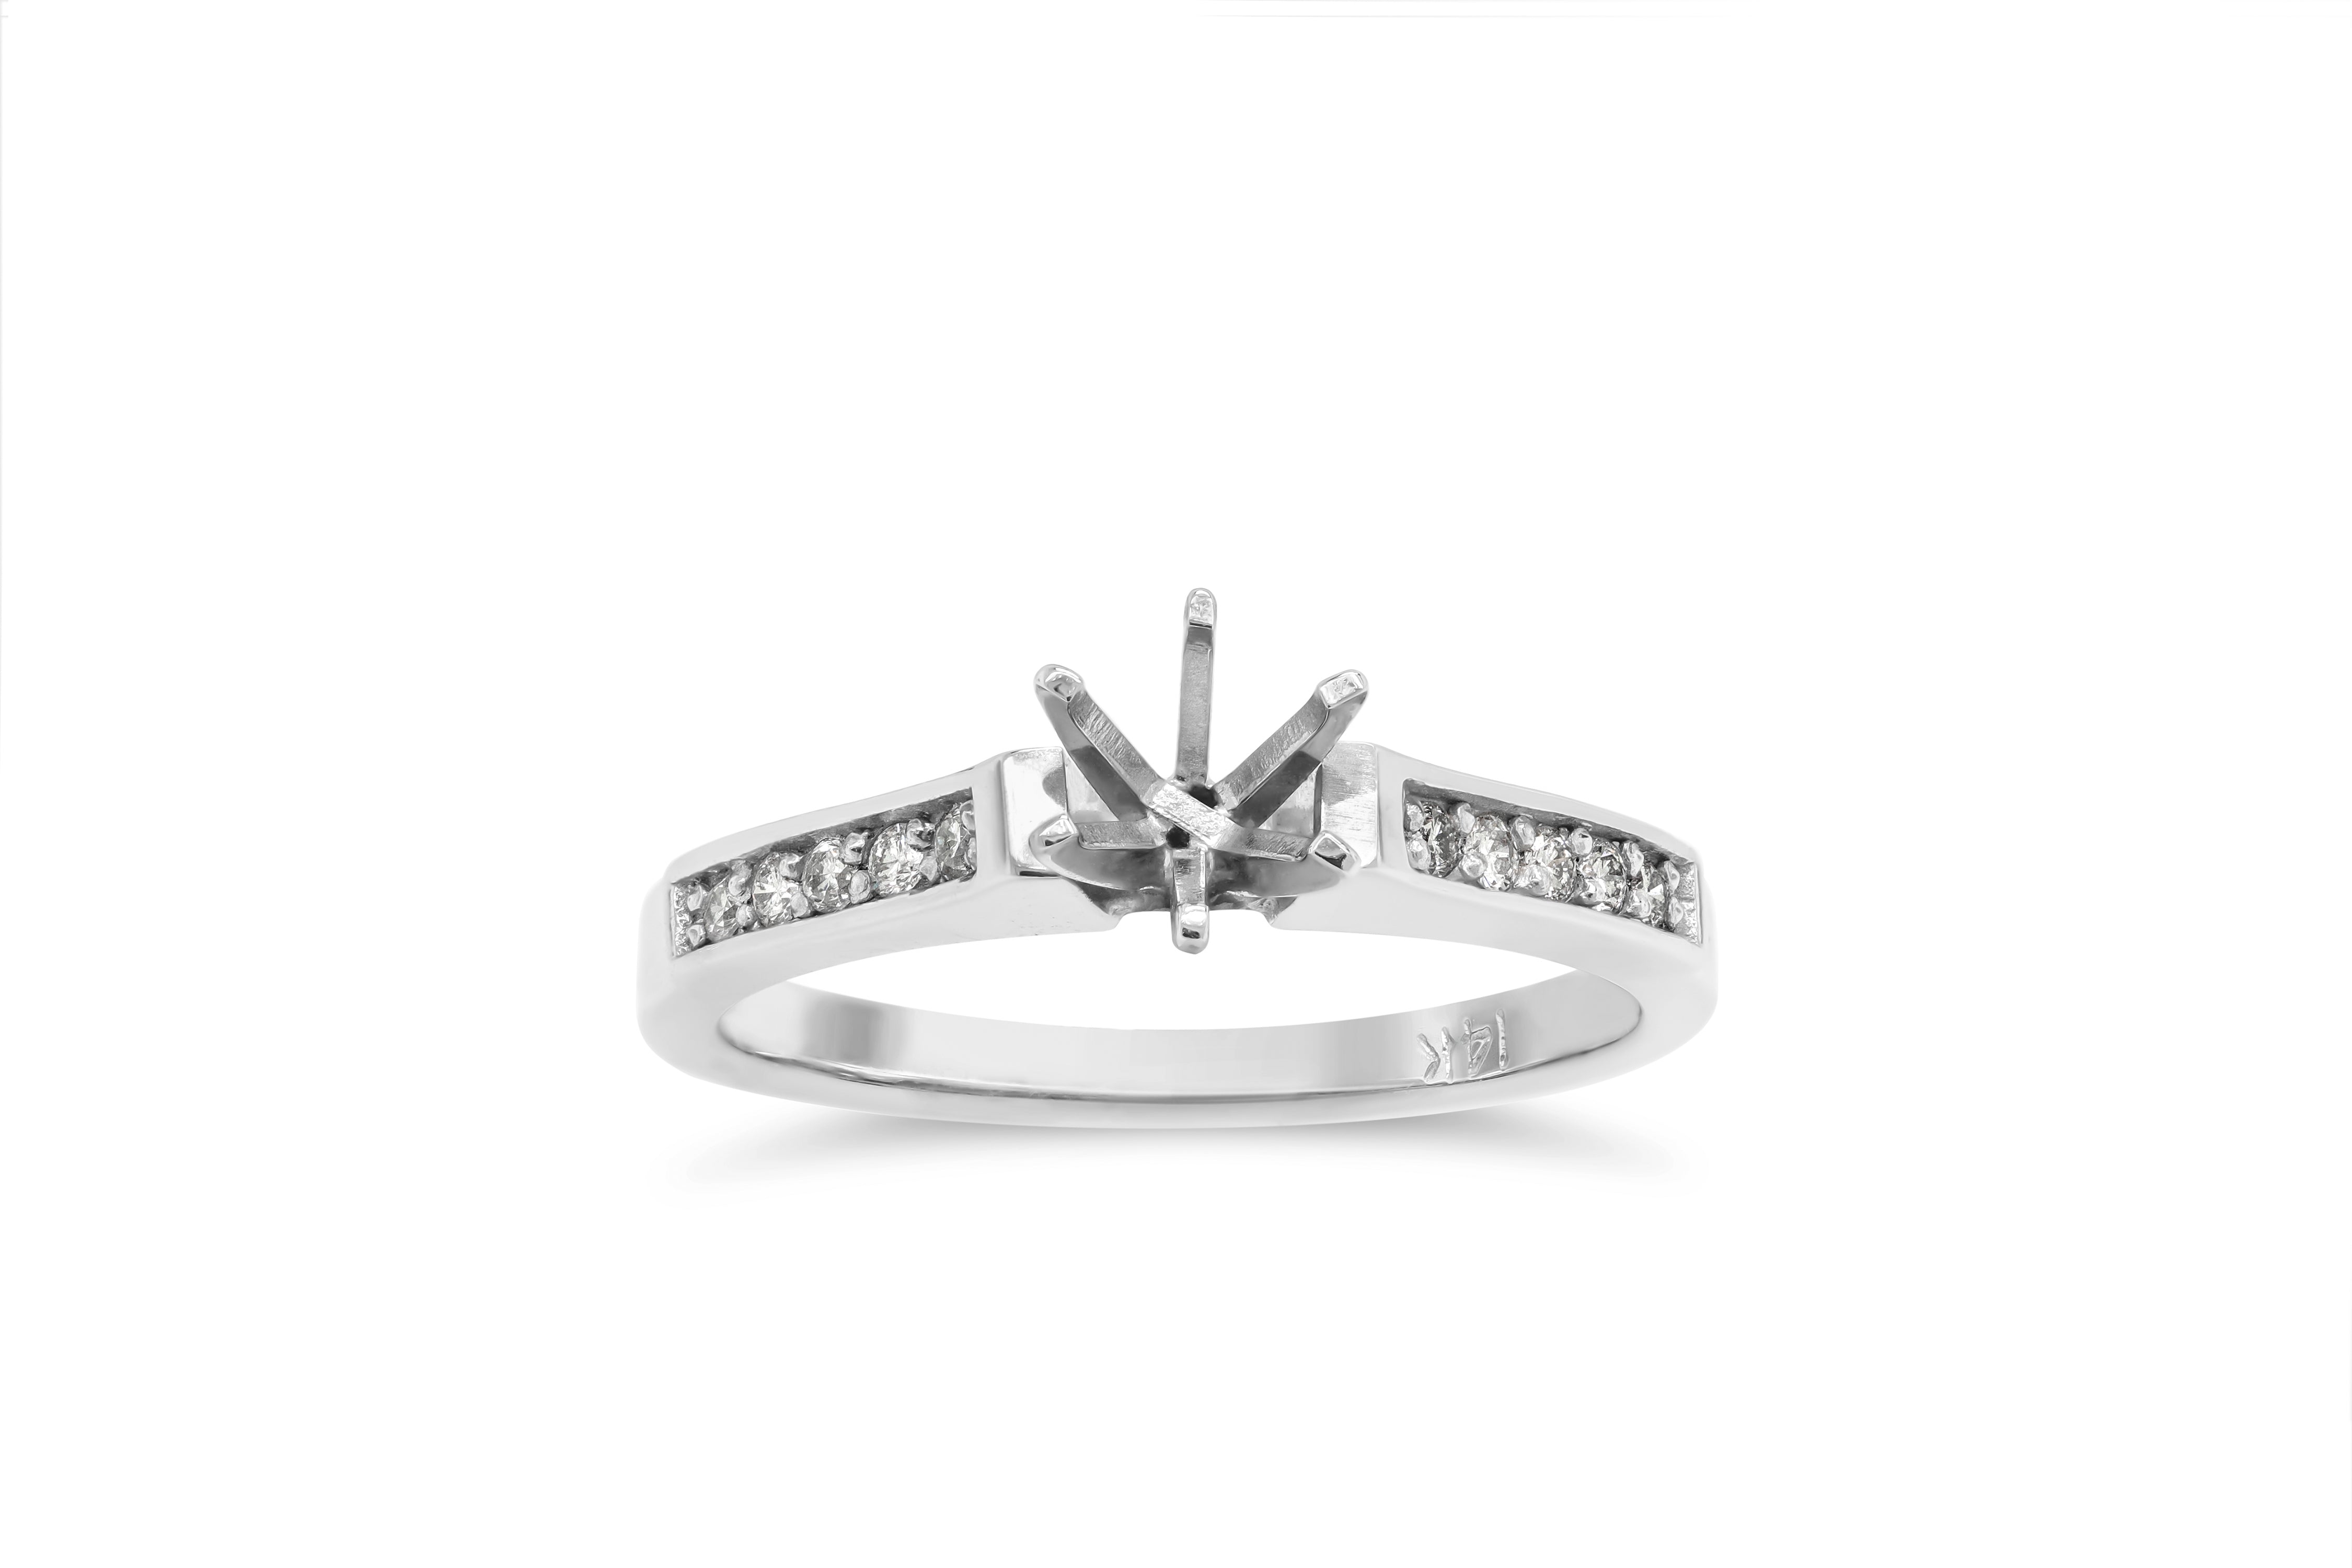 Six Prong Solitaire Setting – Knife Edge Band Setting 8mm - Gems Unique